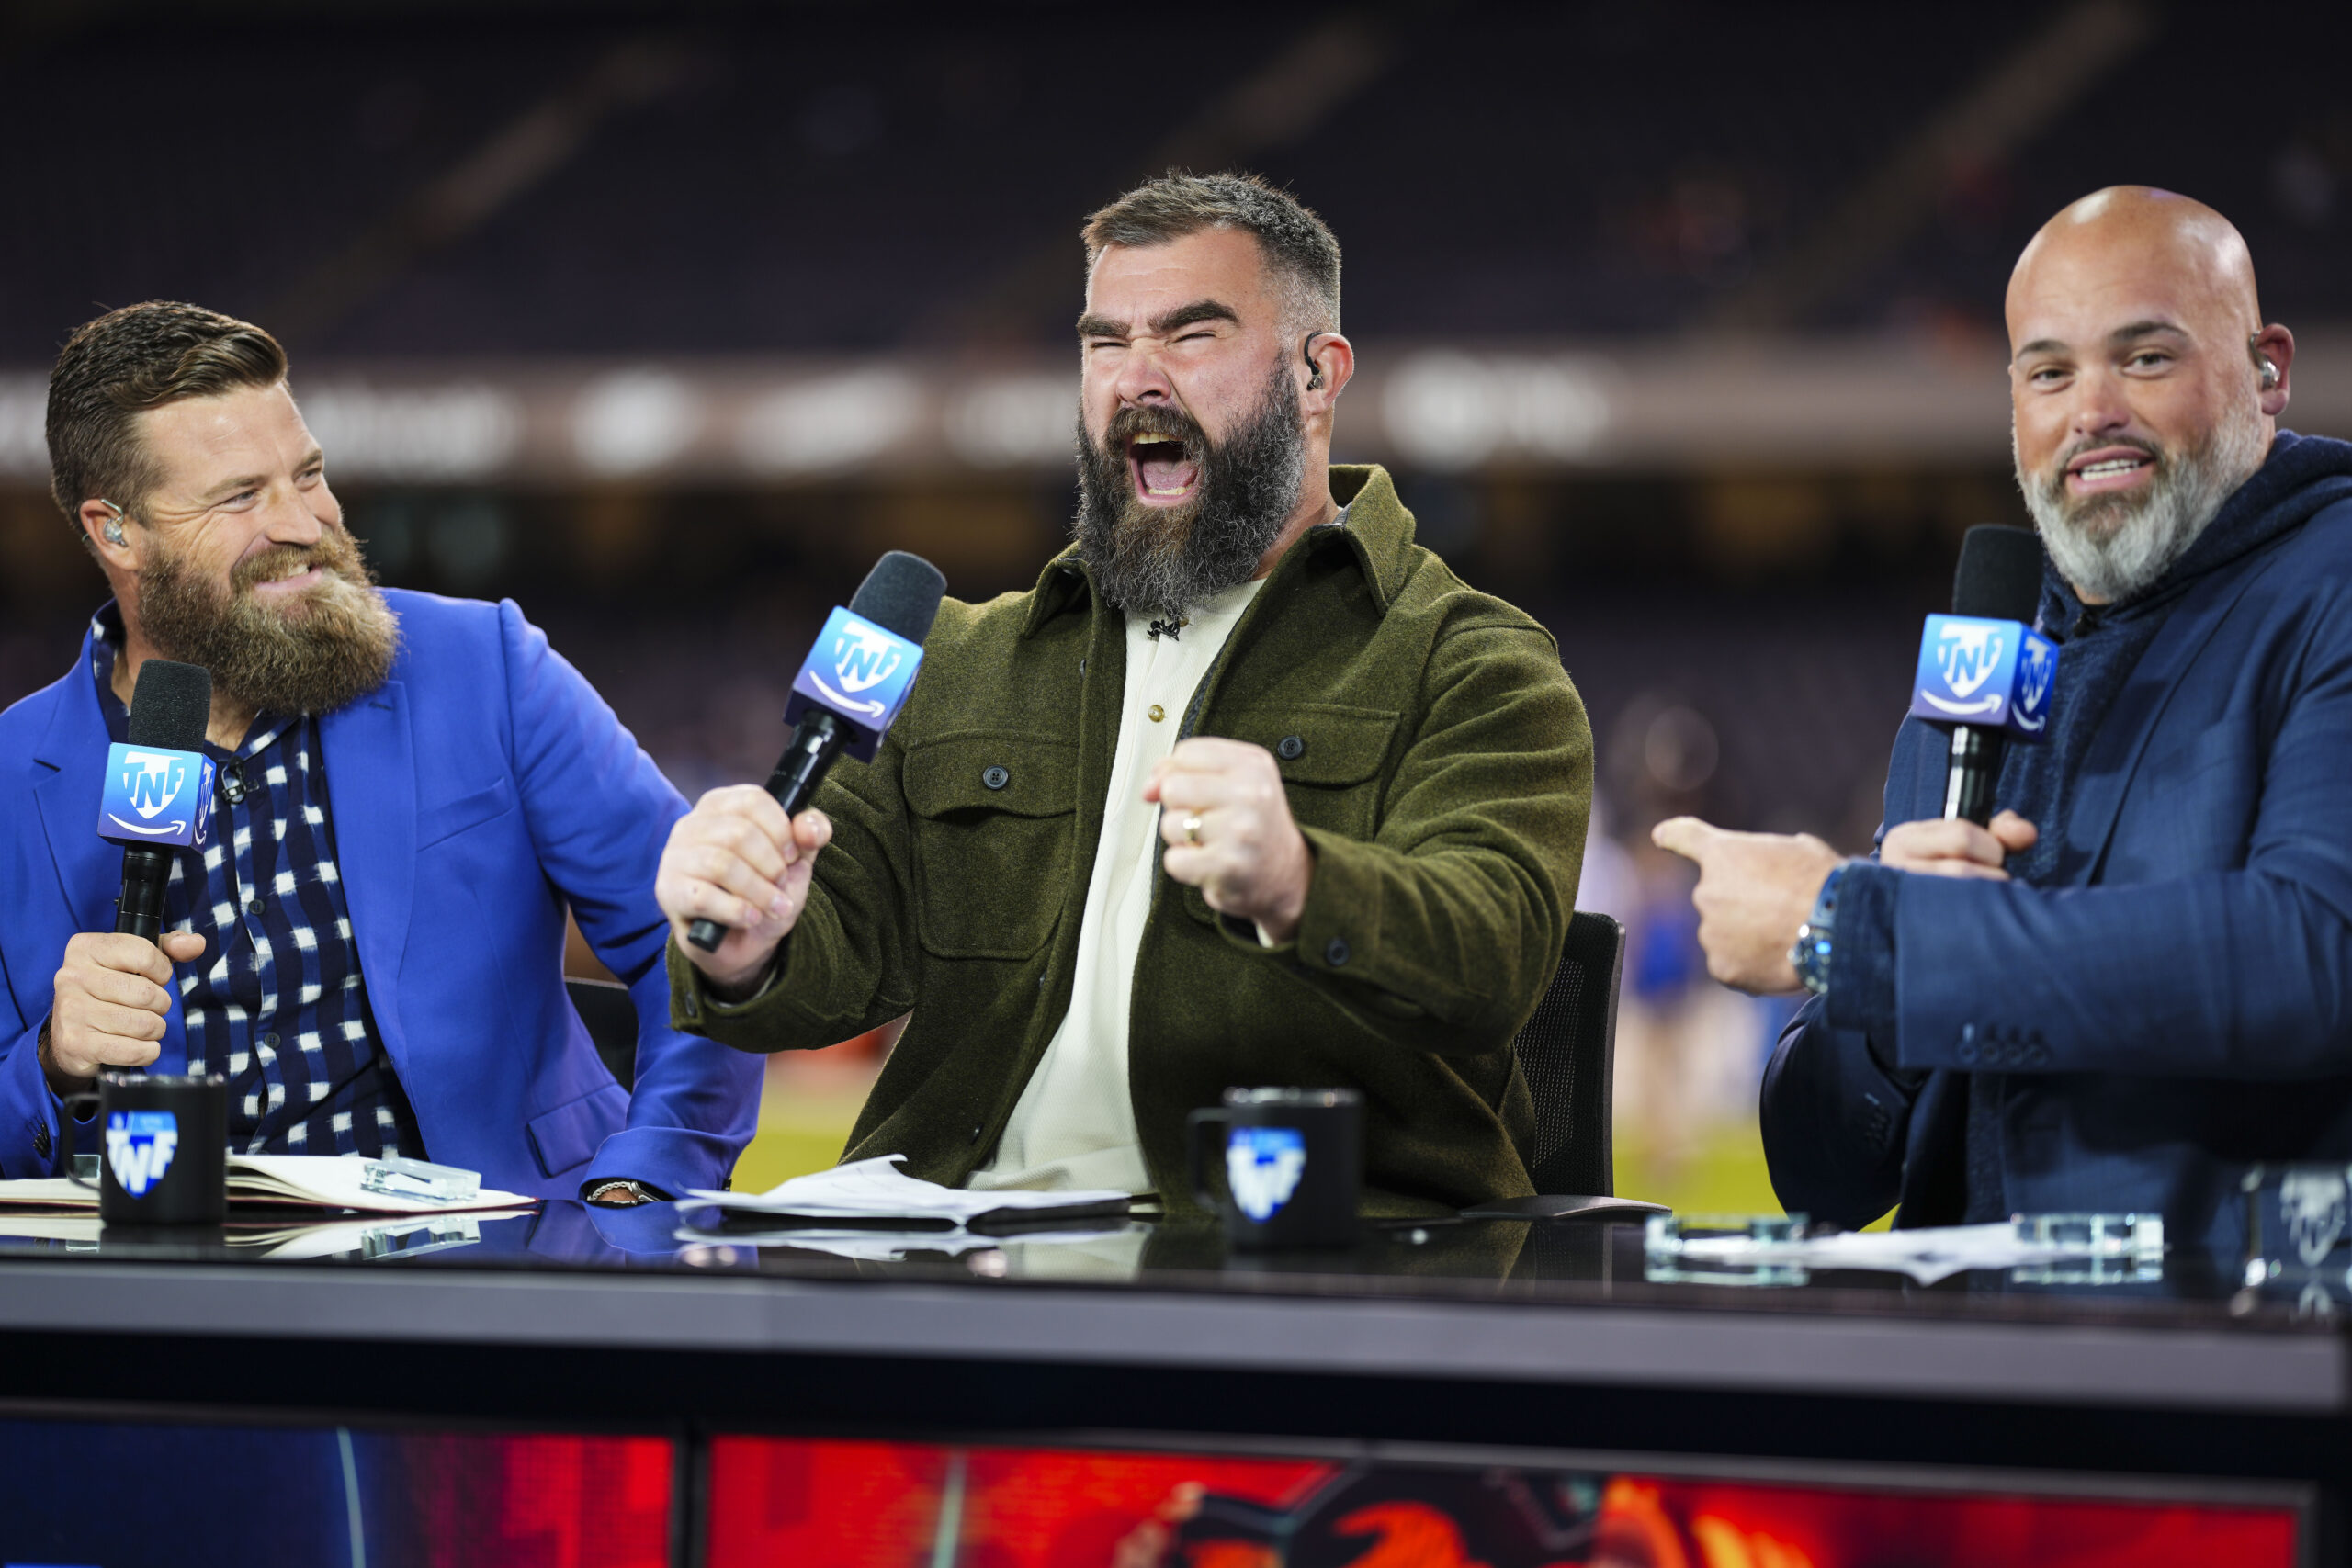 Jason Kelce Meeting With Several Networks About a Potential Move to a Broadcasting Career